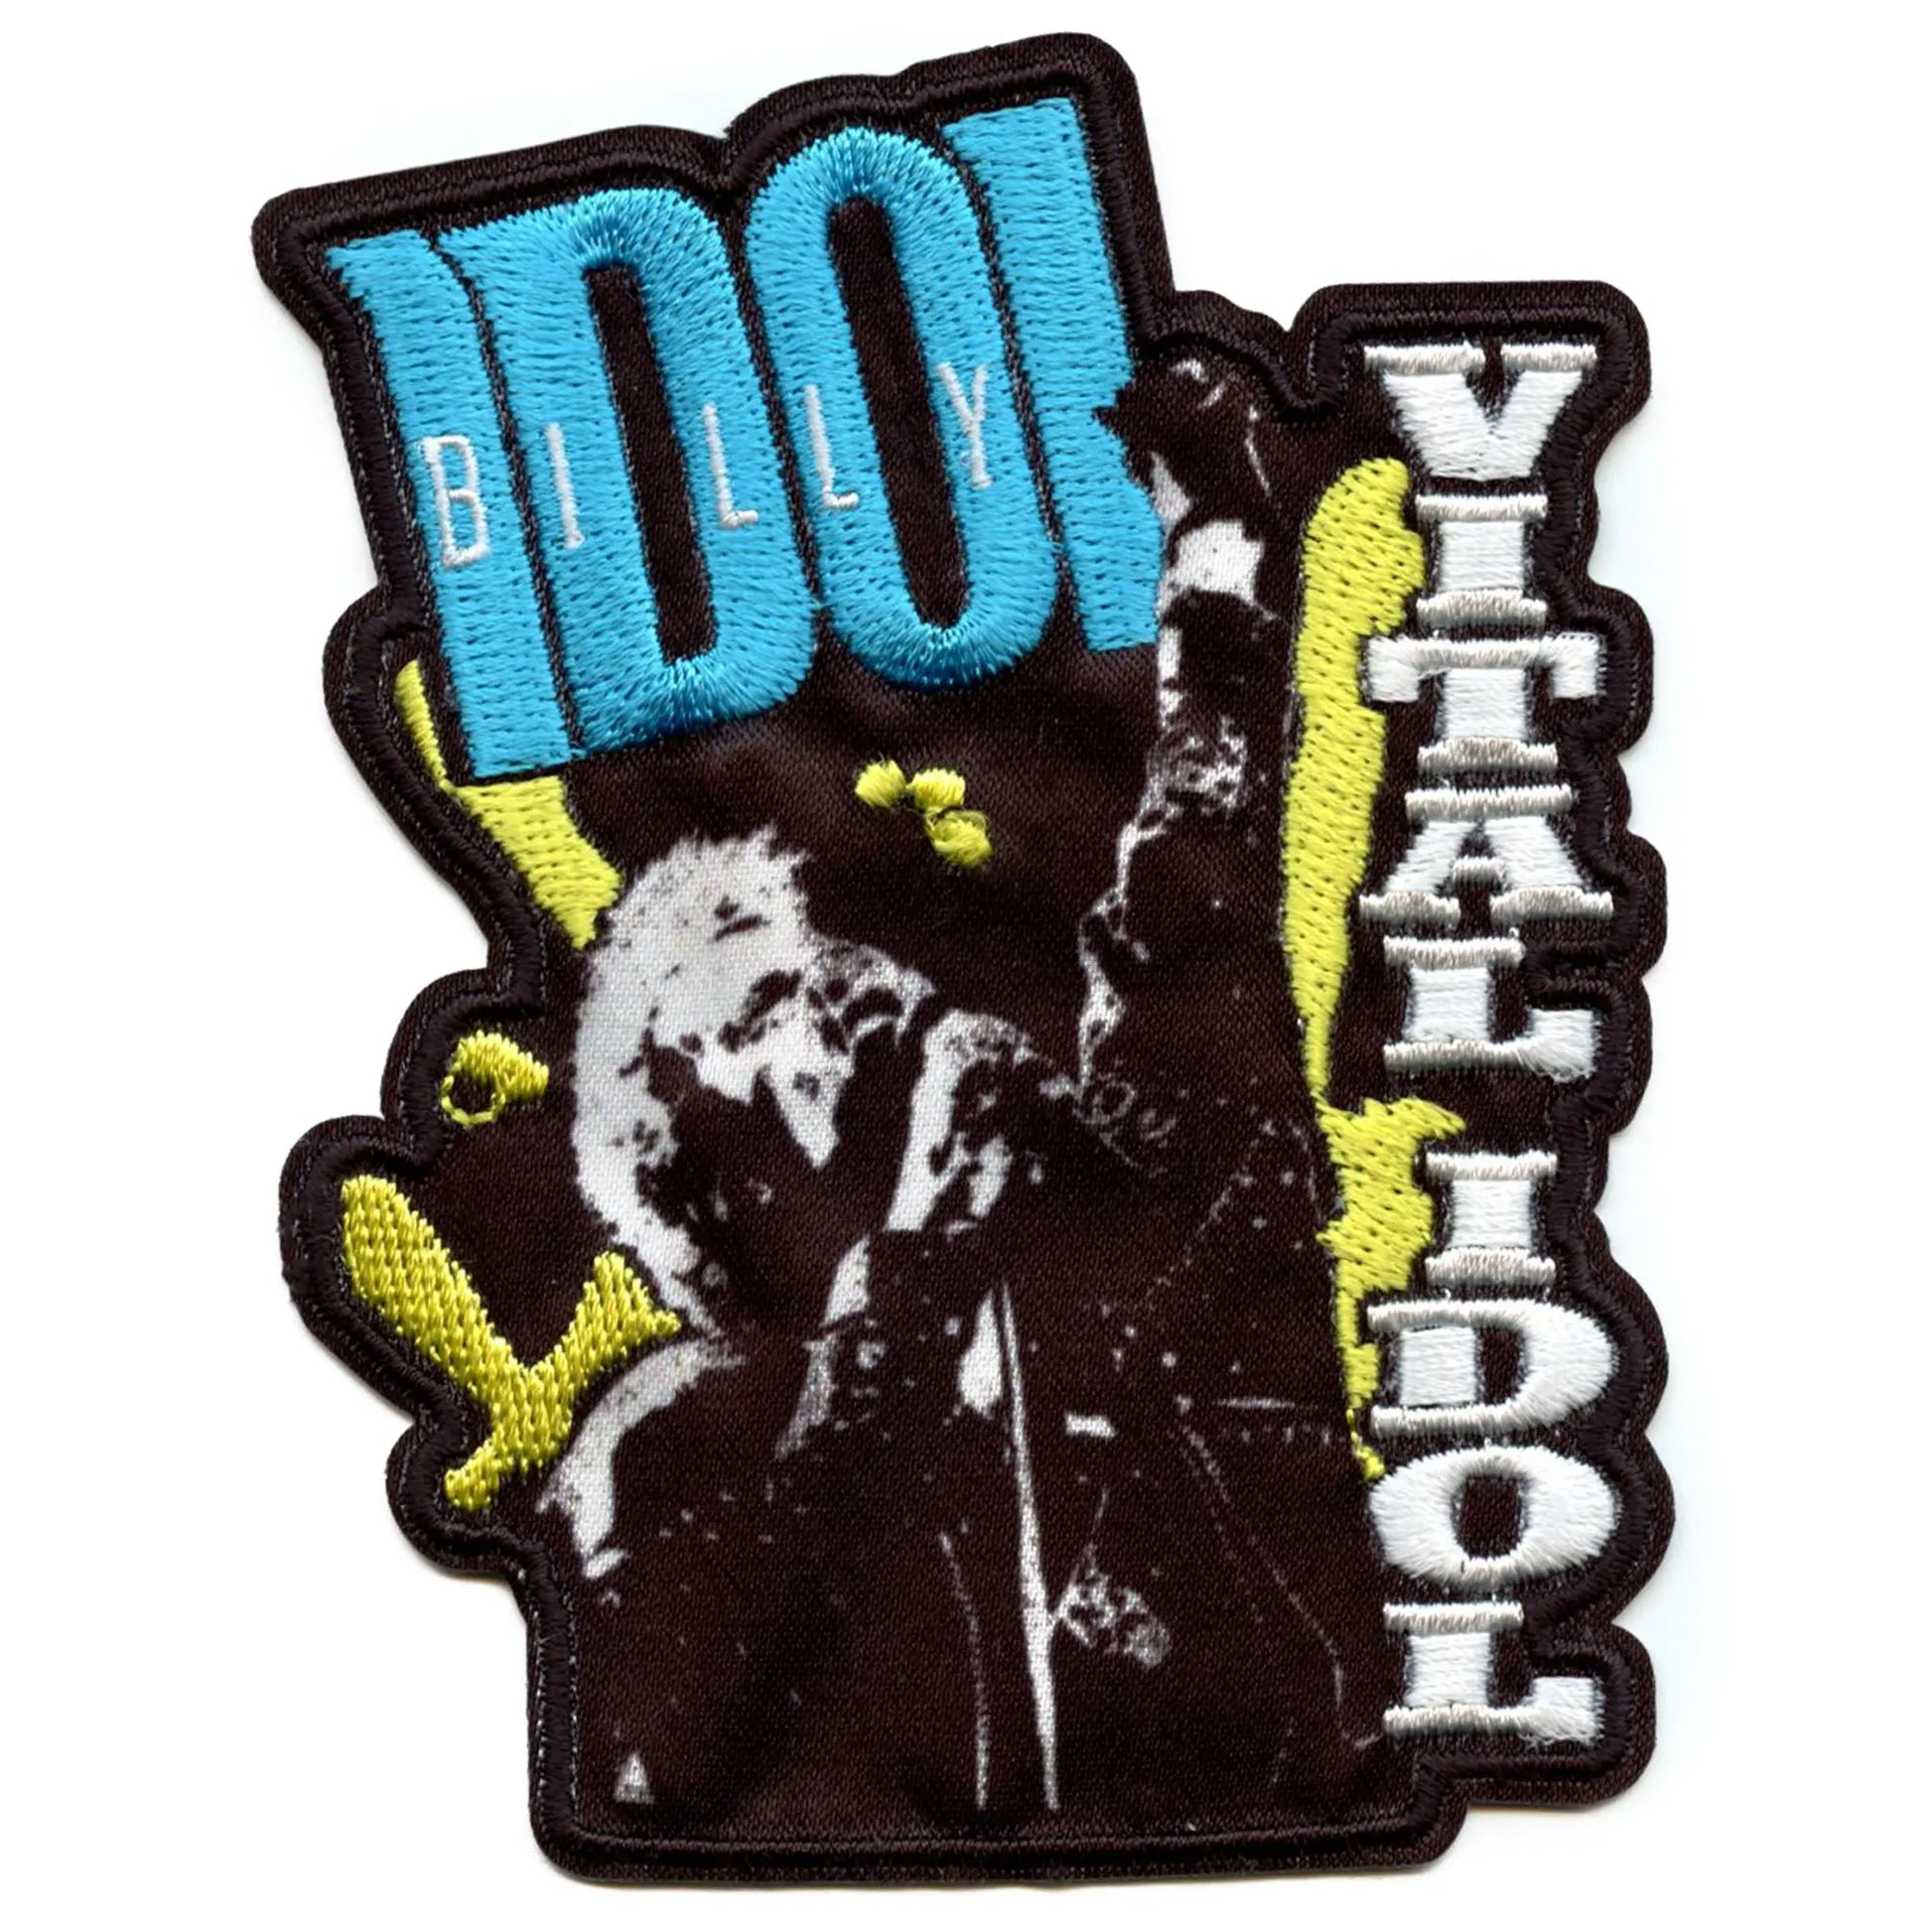 Billy Vital Idol Patch 70s Rock Icon Embroidered Iron On